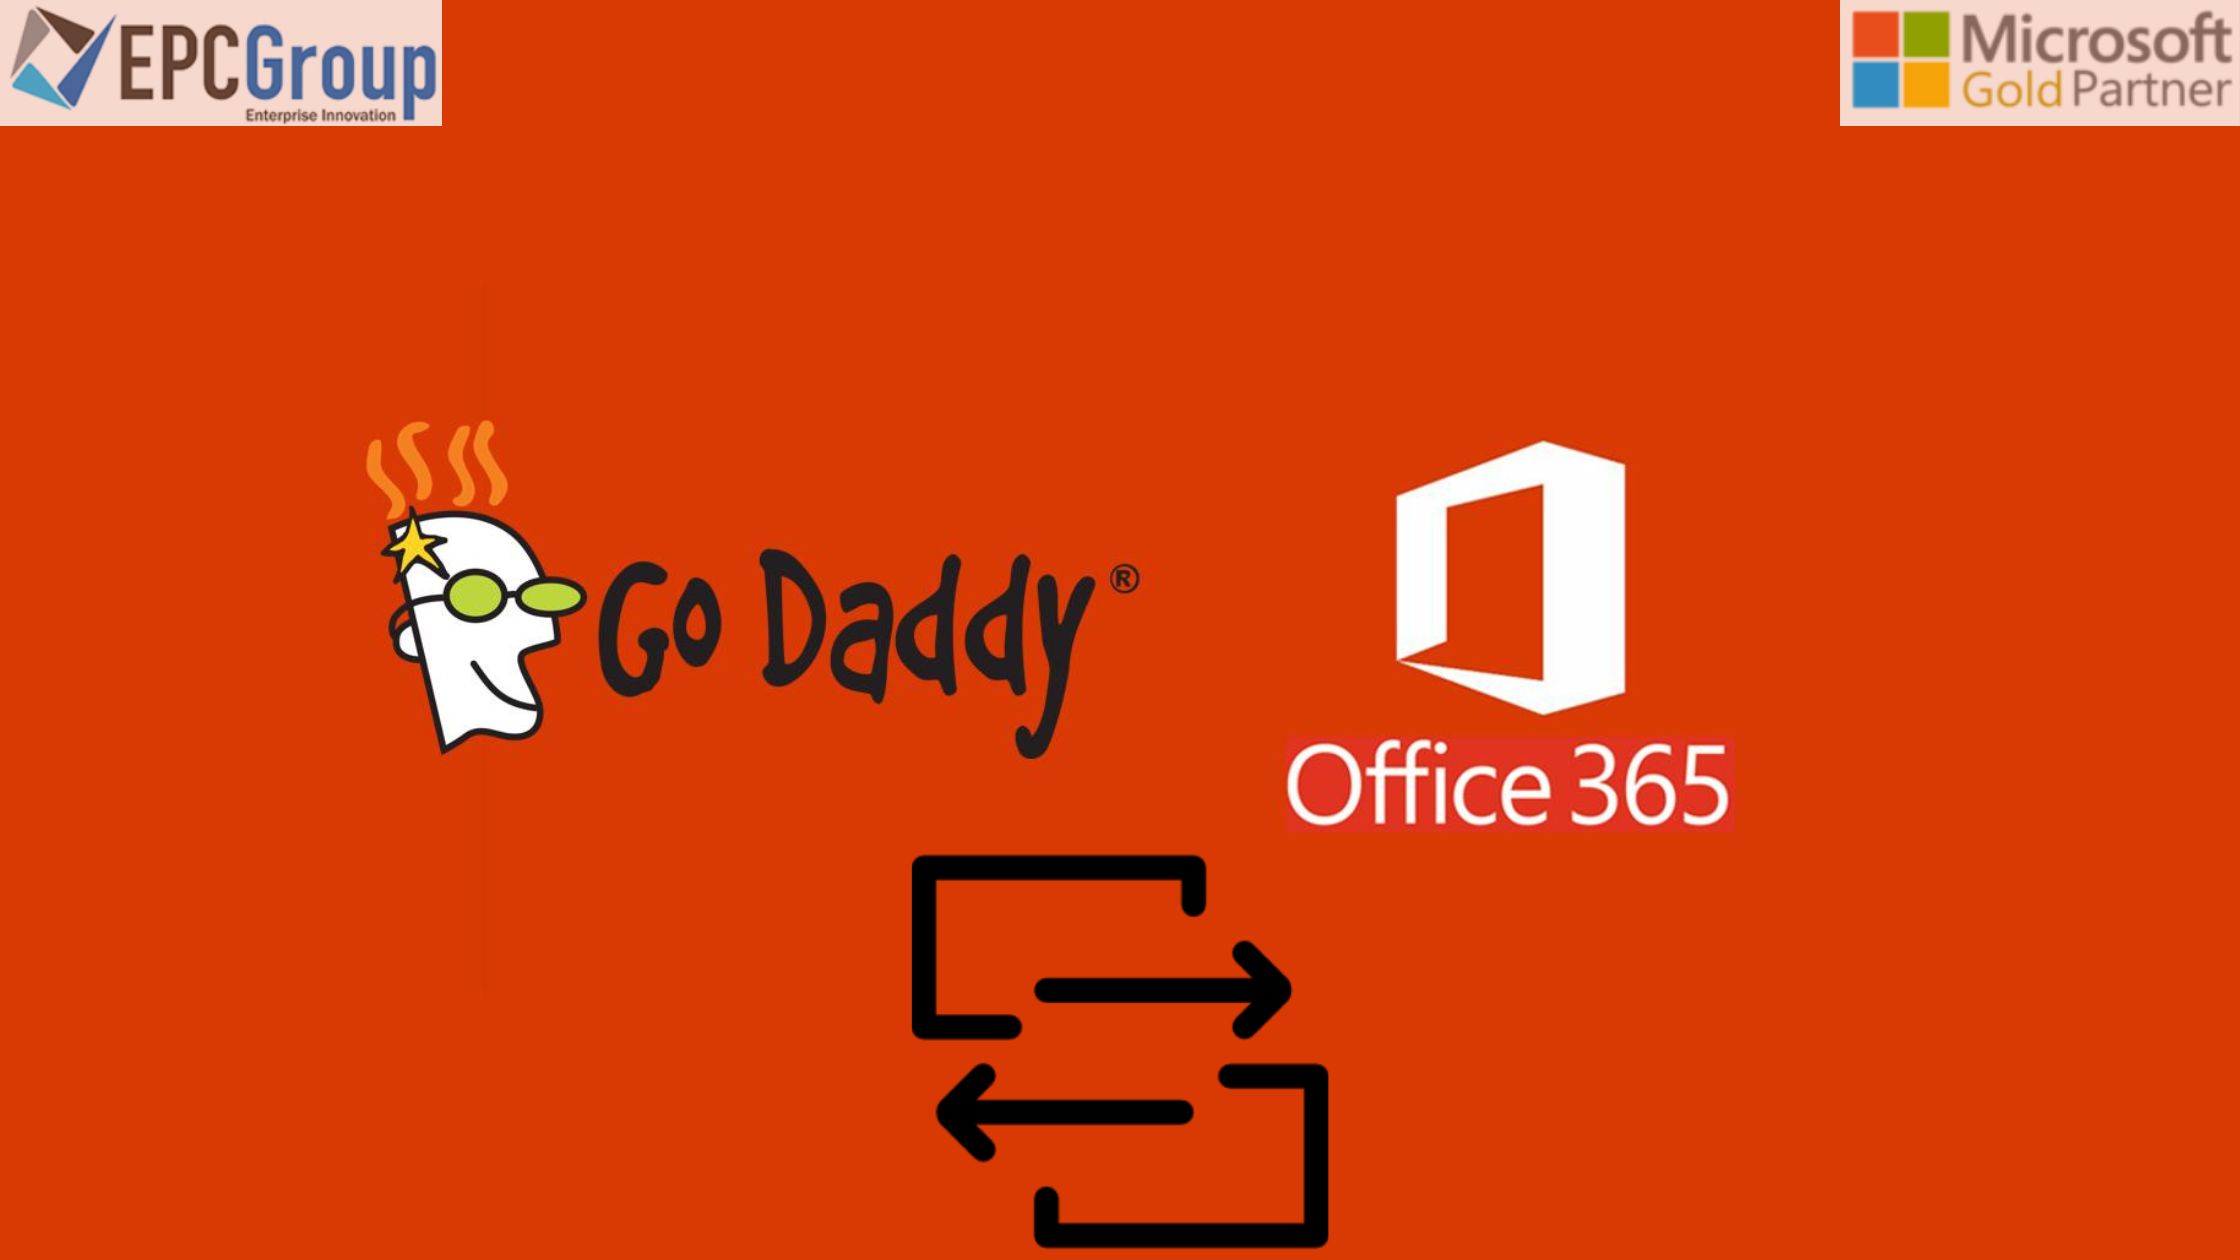 6 Reasons To Migrate From GoDaddy To Office 365 - thumb image